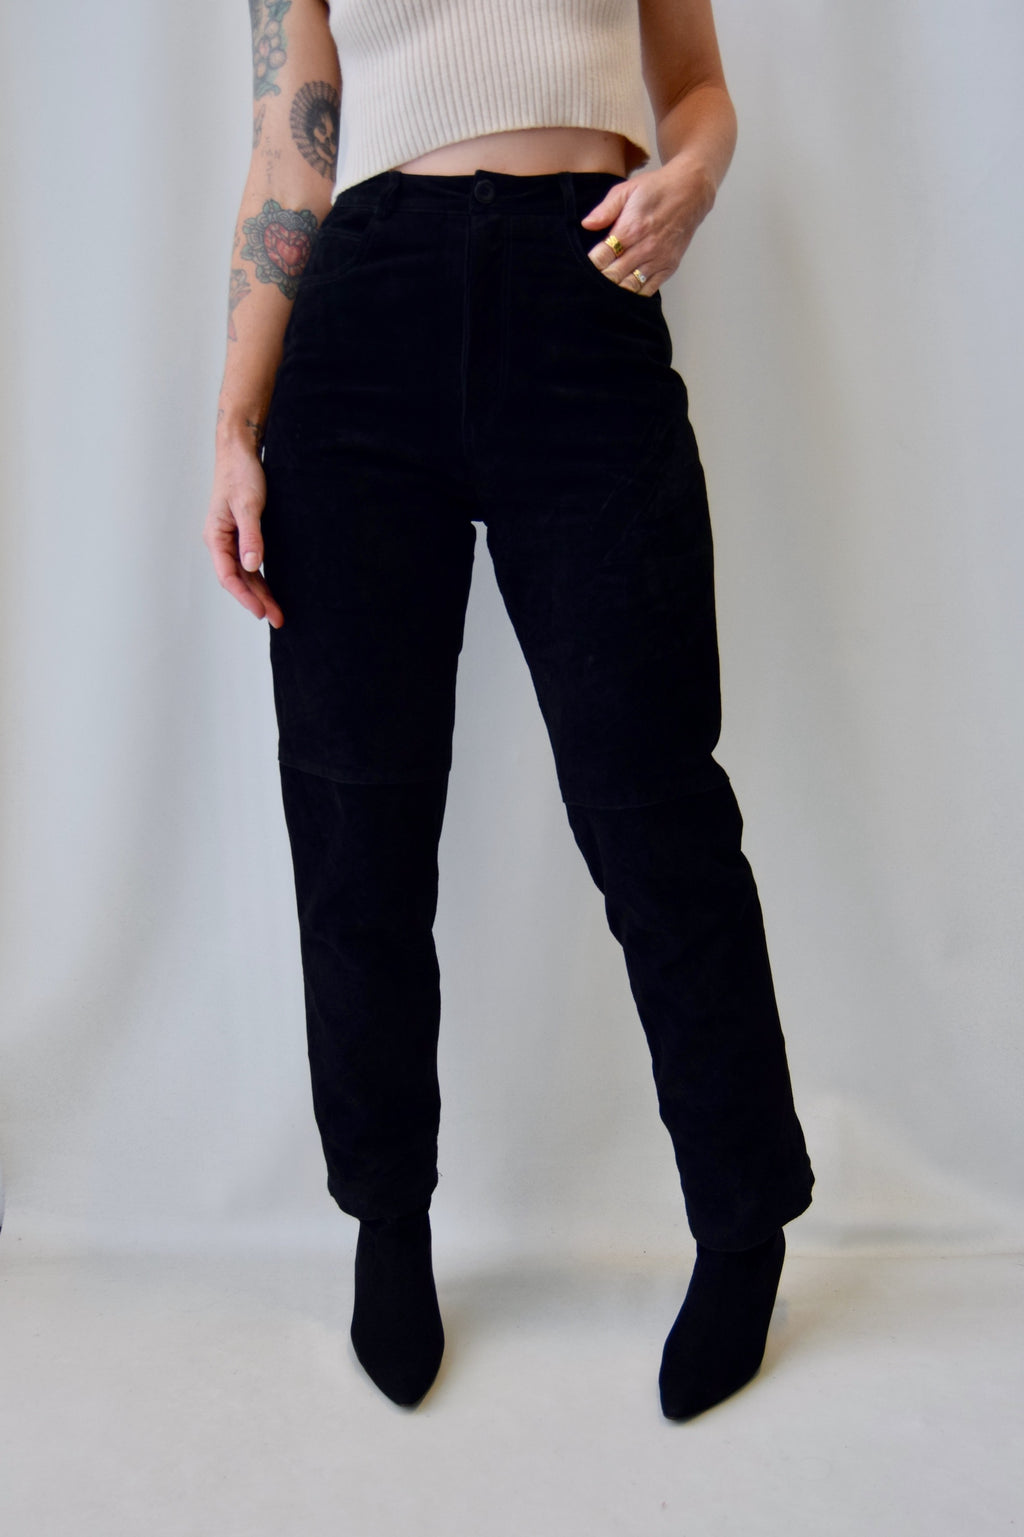 Jeans Style Suede Pants